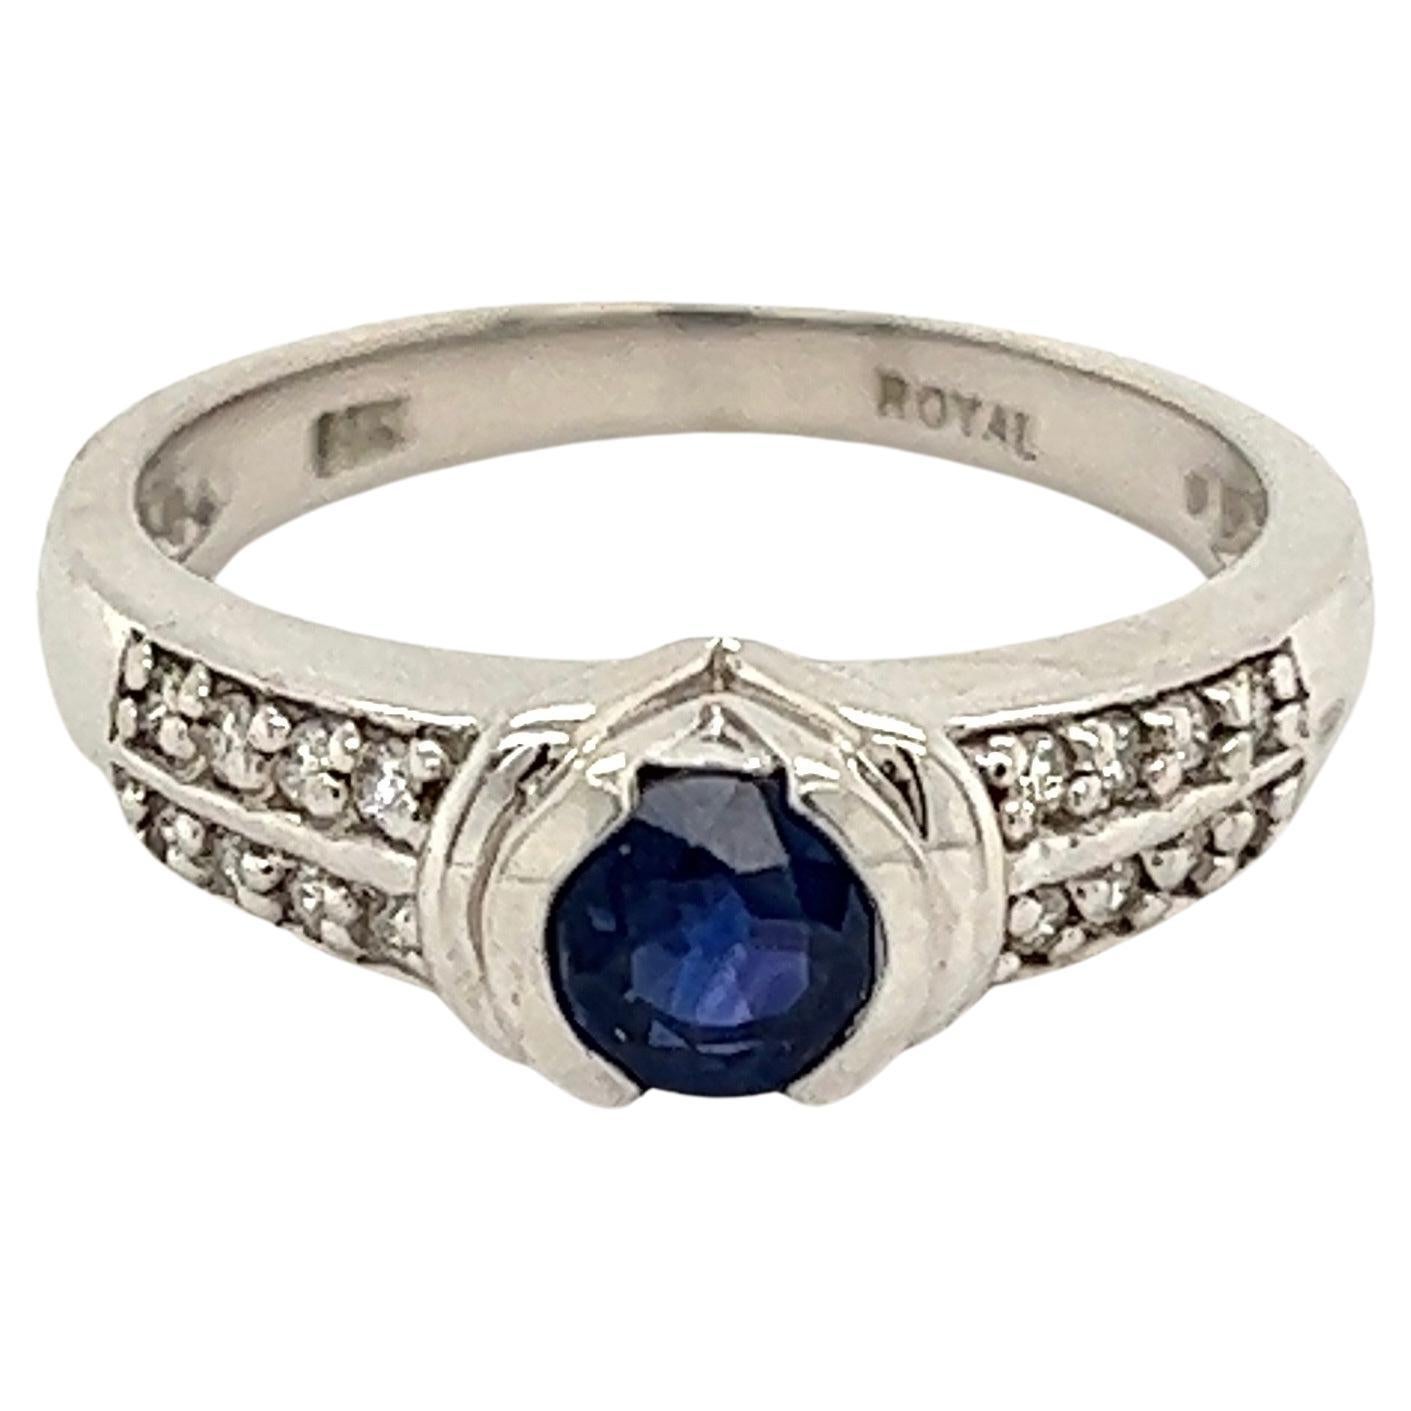 Sapphire and Diamond Art Deco Revival Gold Band Ring